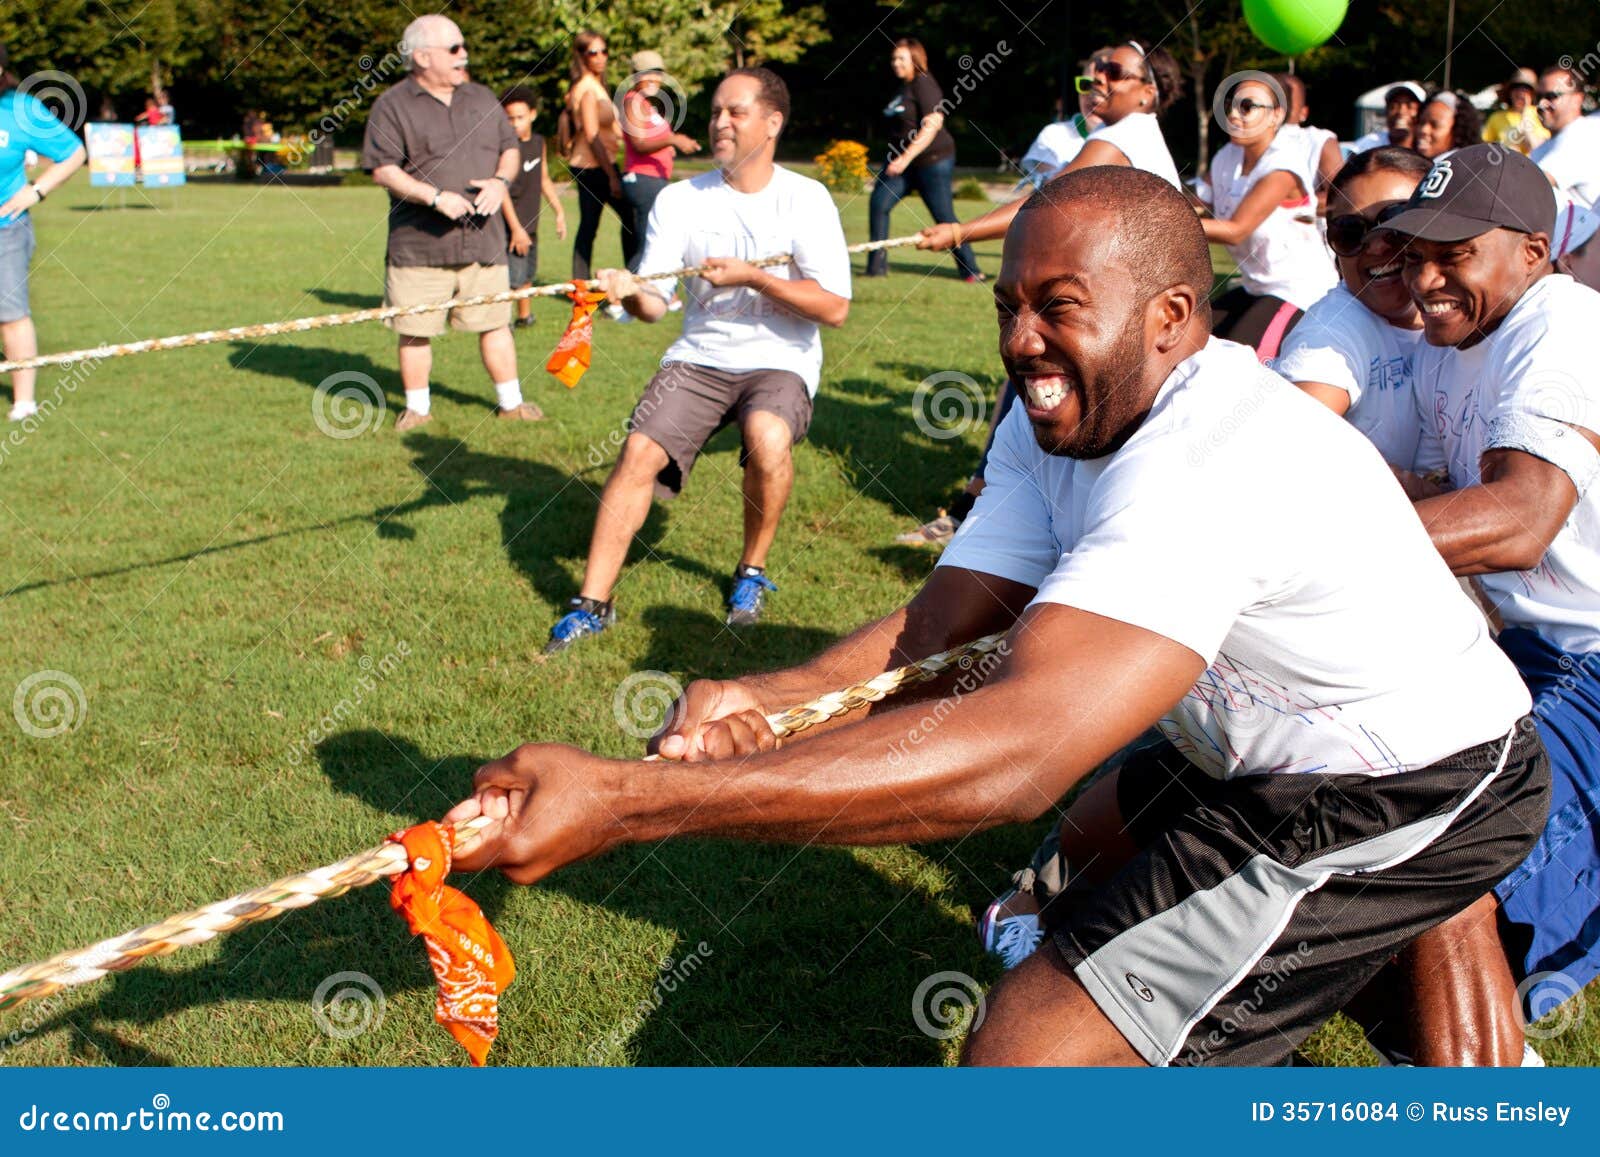 Tug-of-War Teams Pull Rope in Summer Fundraising Event Editorial